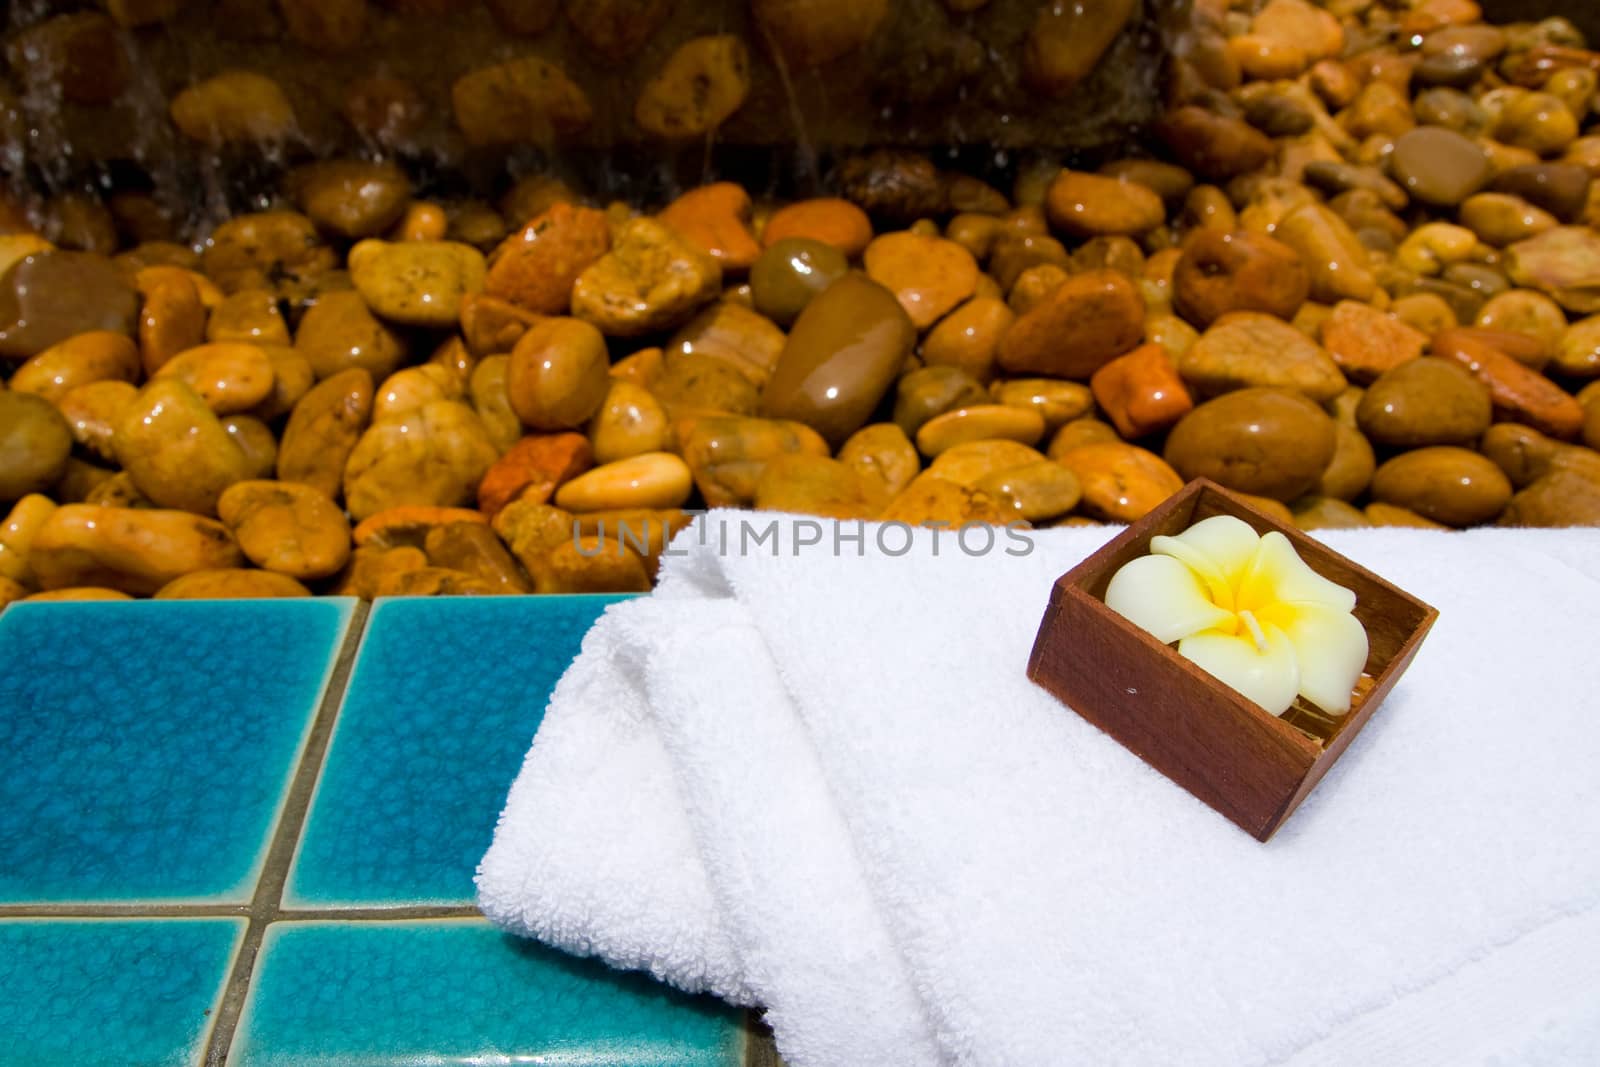 Spa set with towel and flower candle on the green tile floor with a lot of rocks